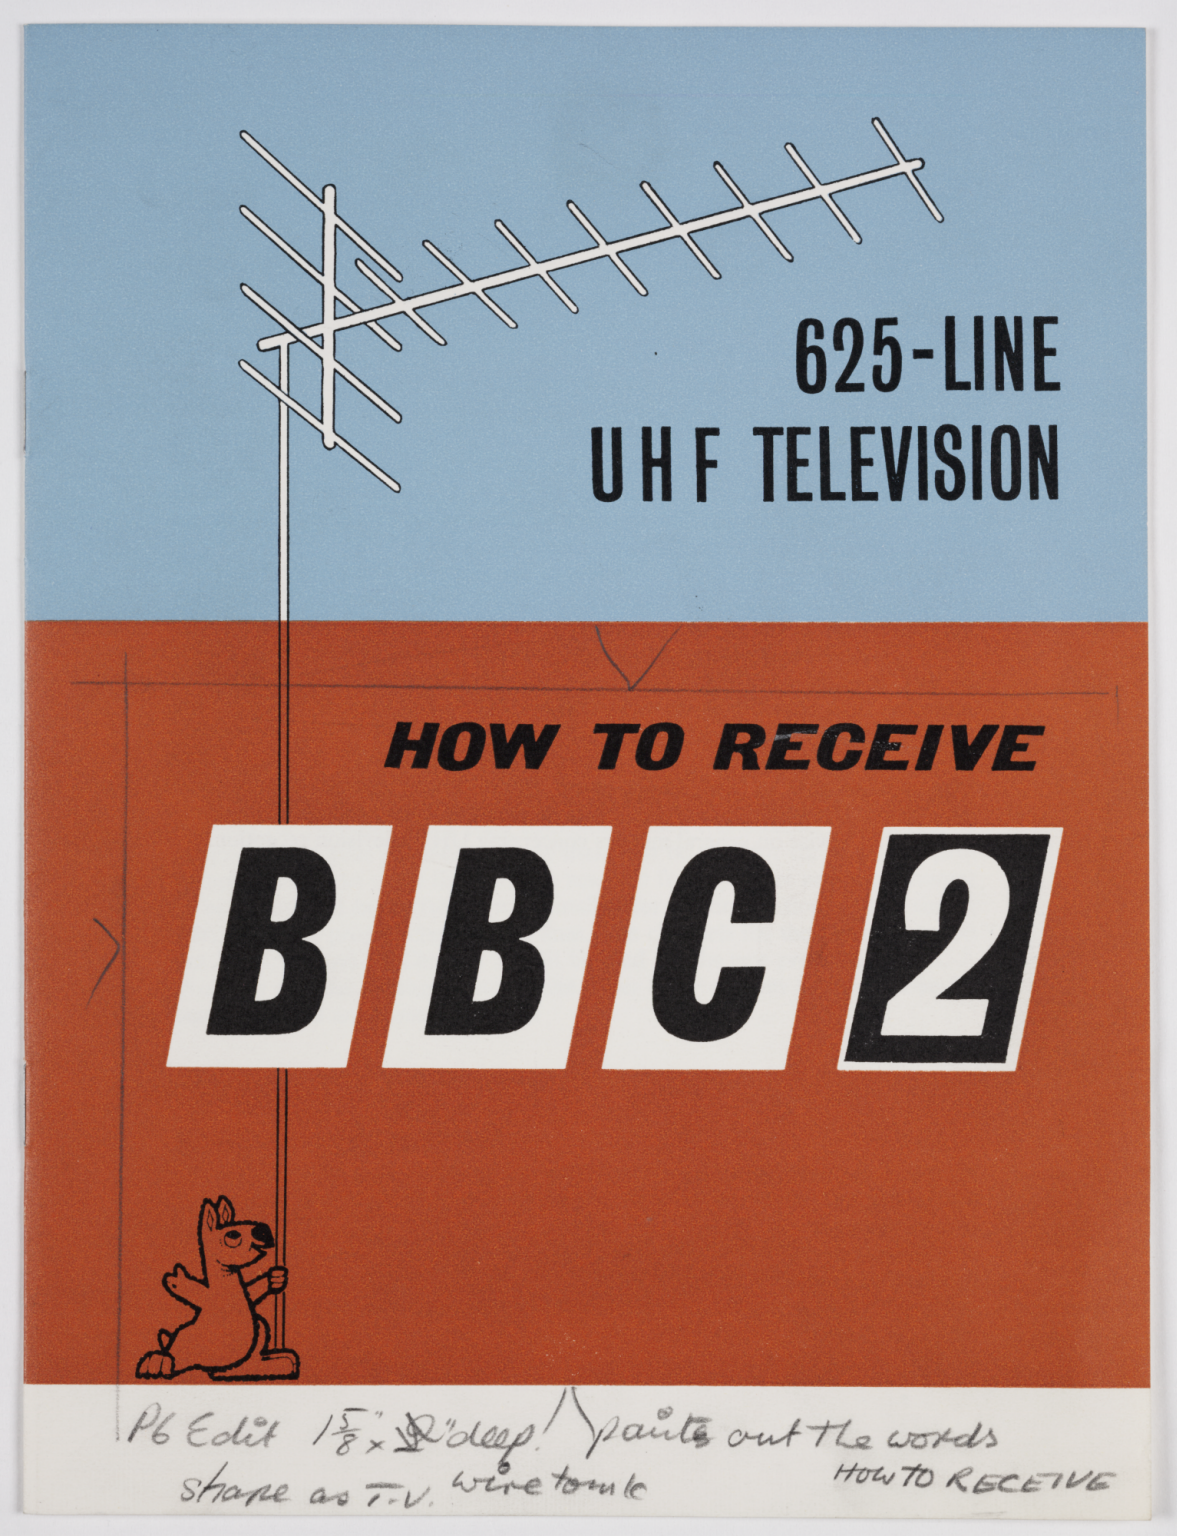 The front cover of a BBC booklet describing How to Receive BBC 2